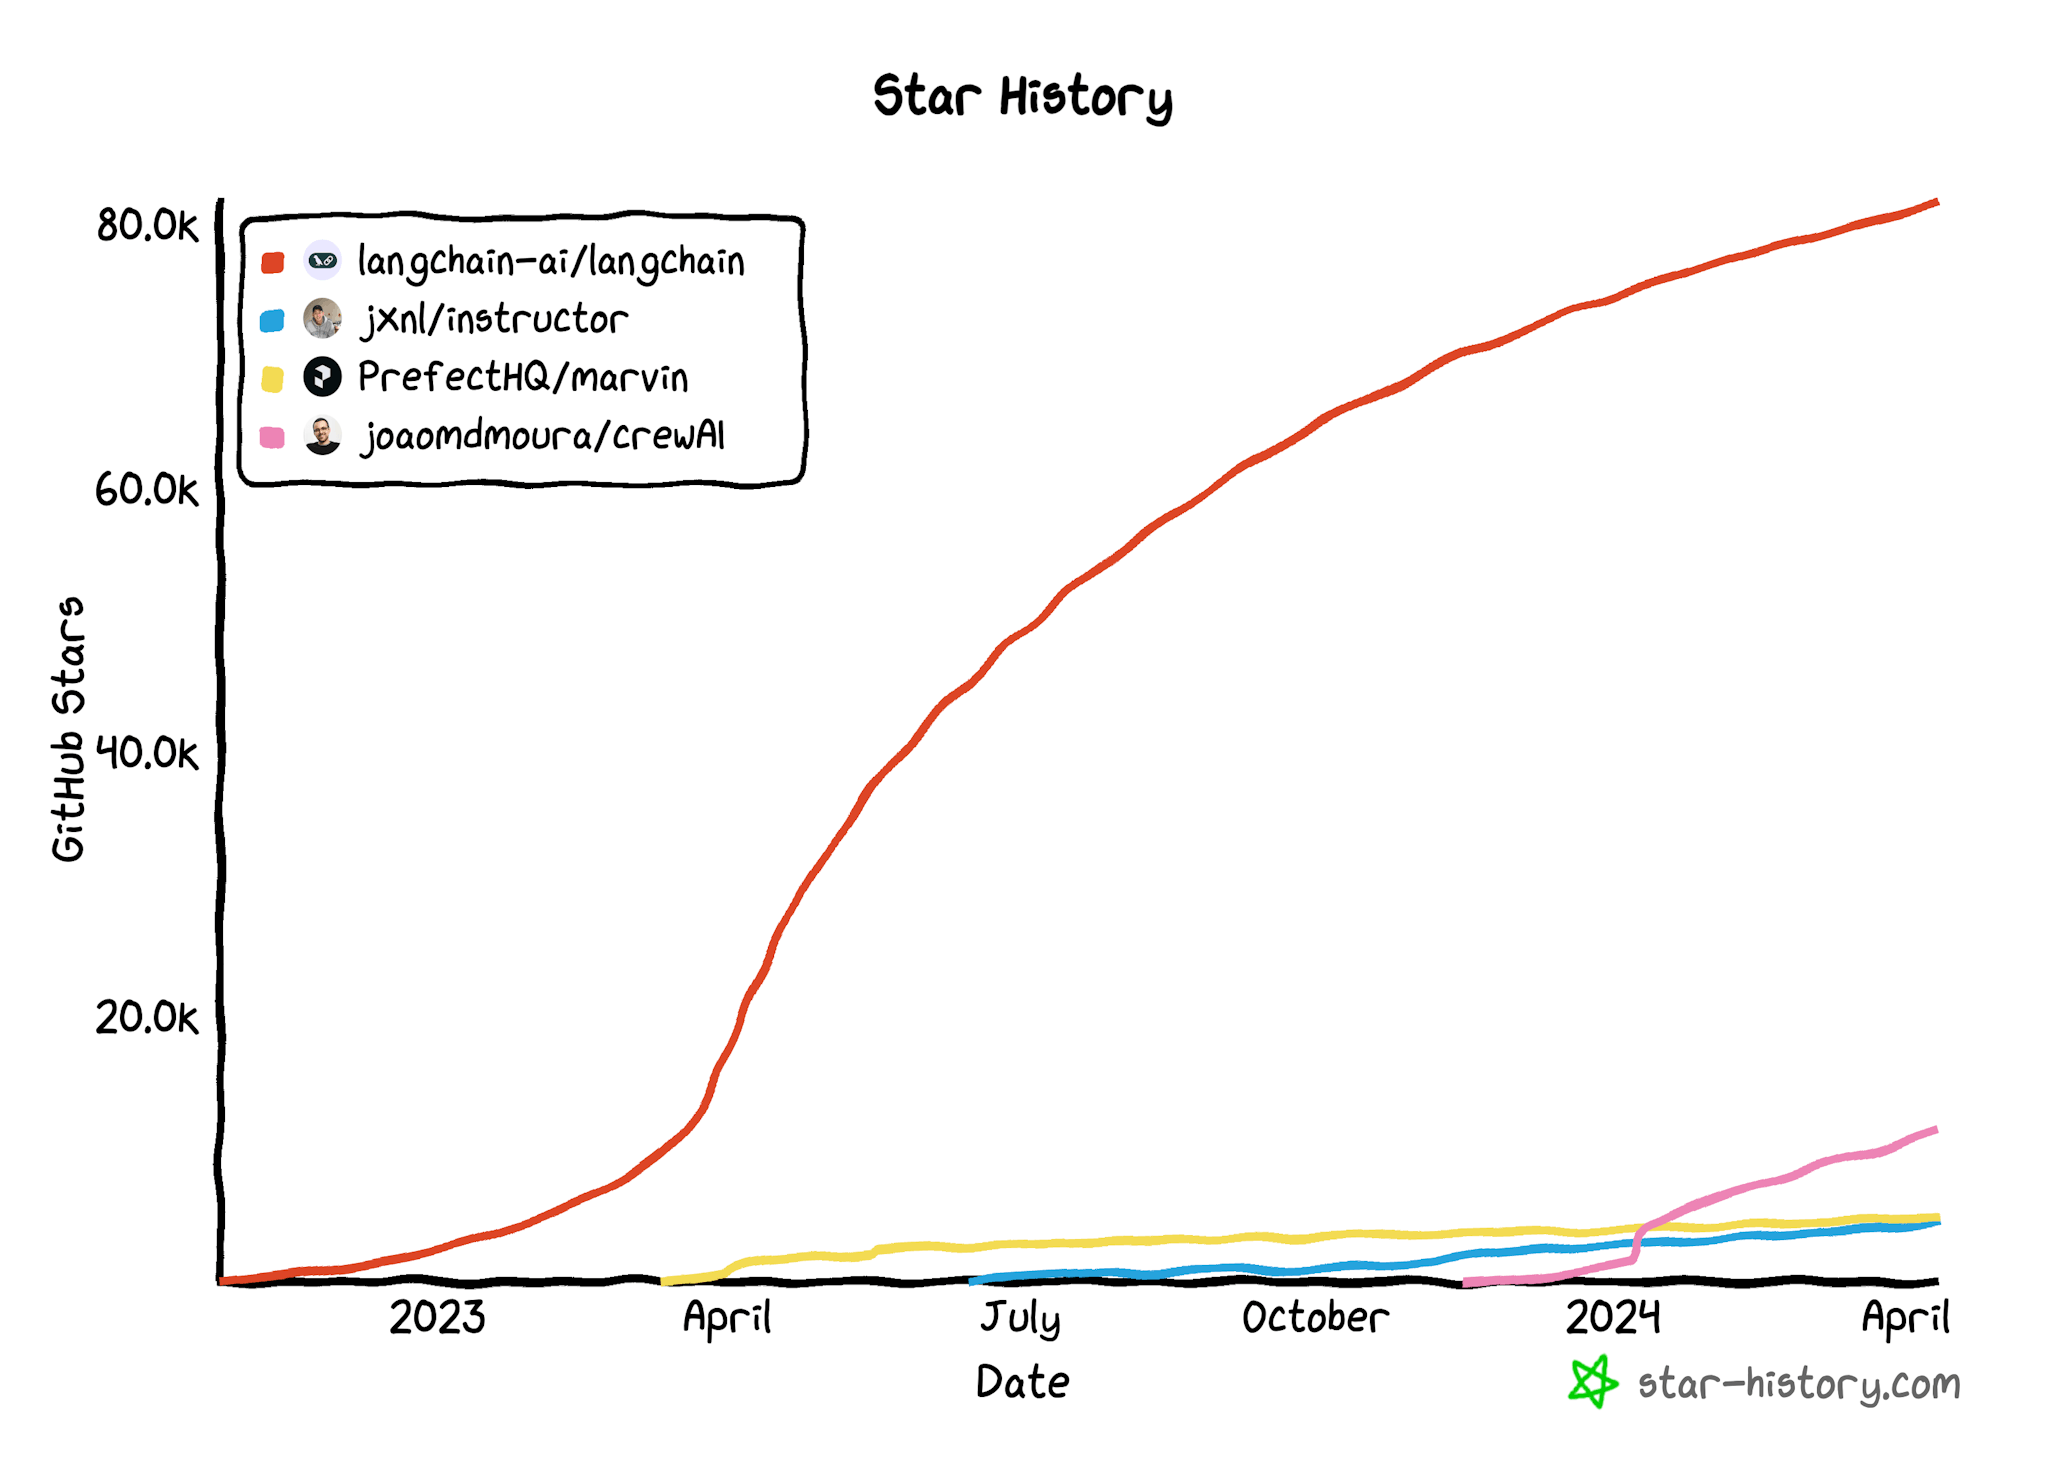 GitHub Stars History for Instructor compared to Langchain, Marvin AI and CrewAi